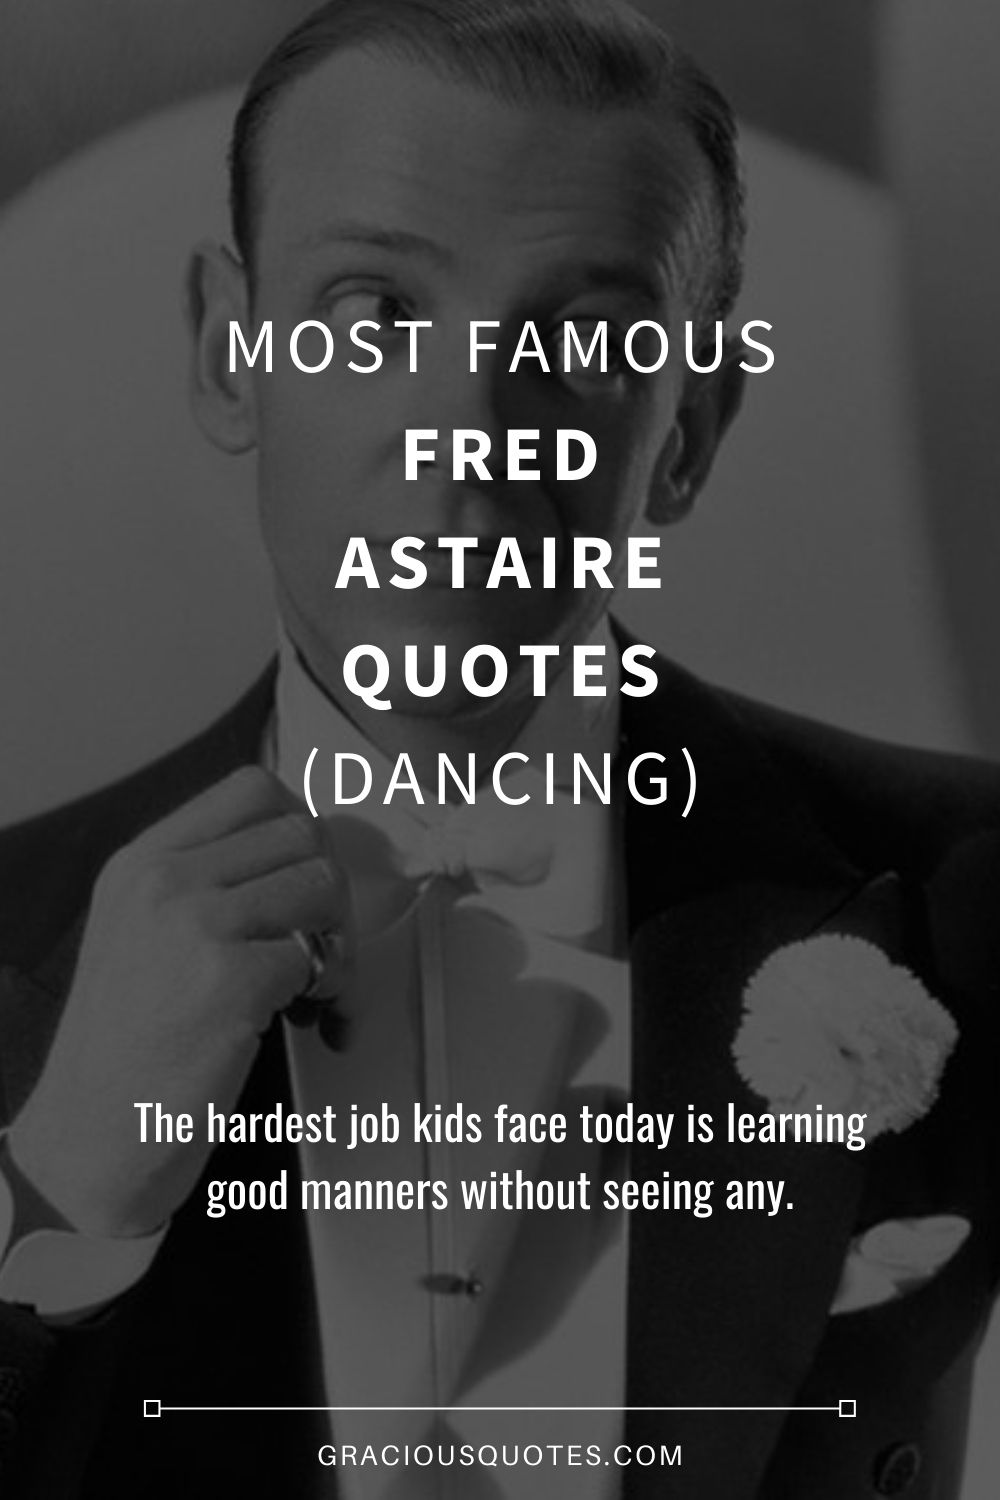 Most Famous Fred Astaire Quotes (DANCING) - Gracious Quotes